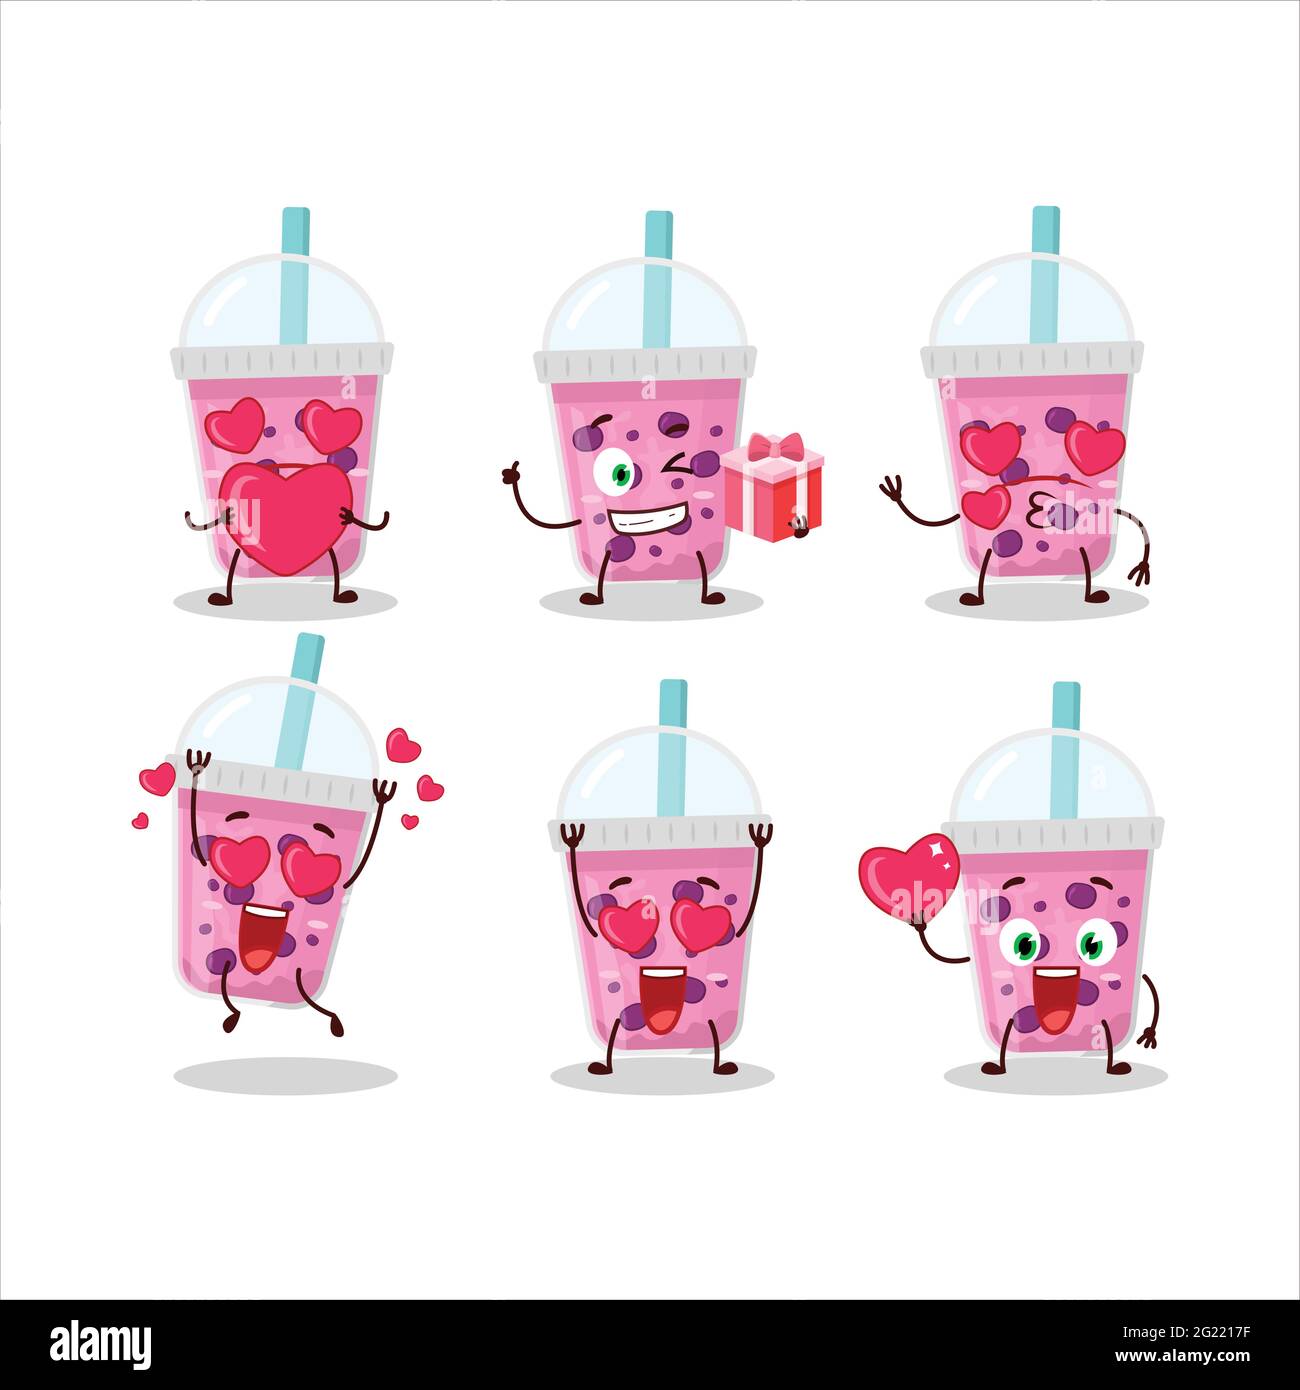 https://c8.alamy.com/comp/2G2217F/grapes-milk-with-boba-cartoon-character-with-love-cute-emoticon-vector-illustration-2G2217F.jpg